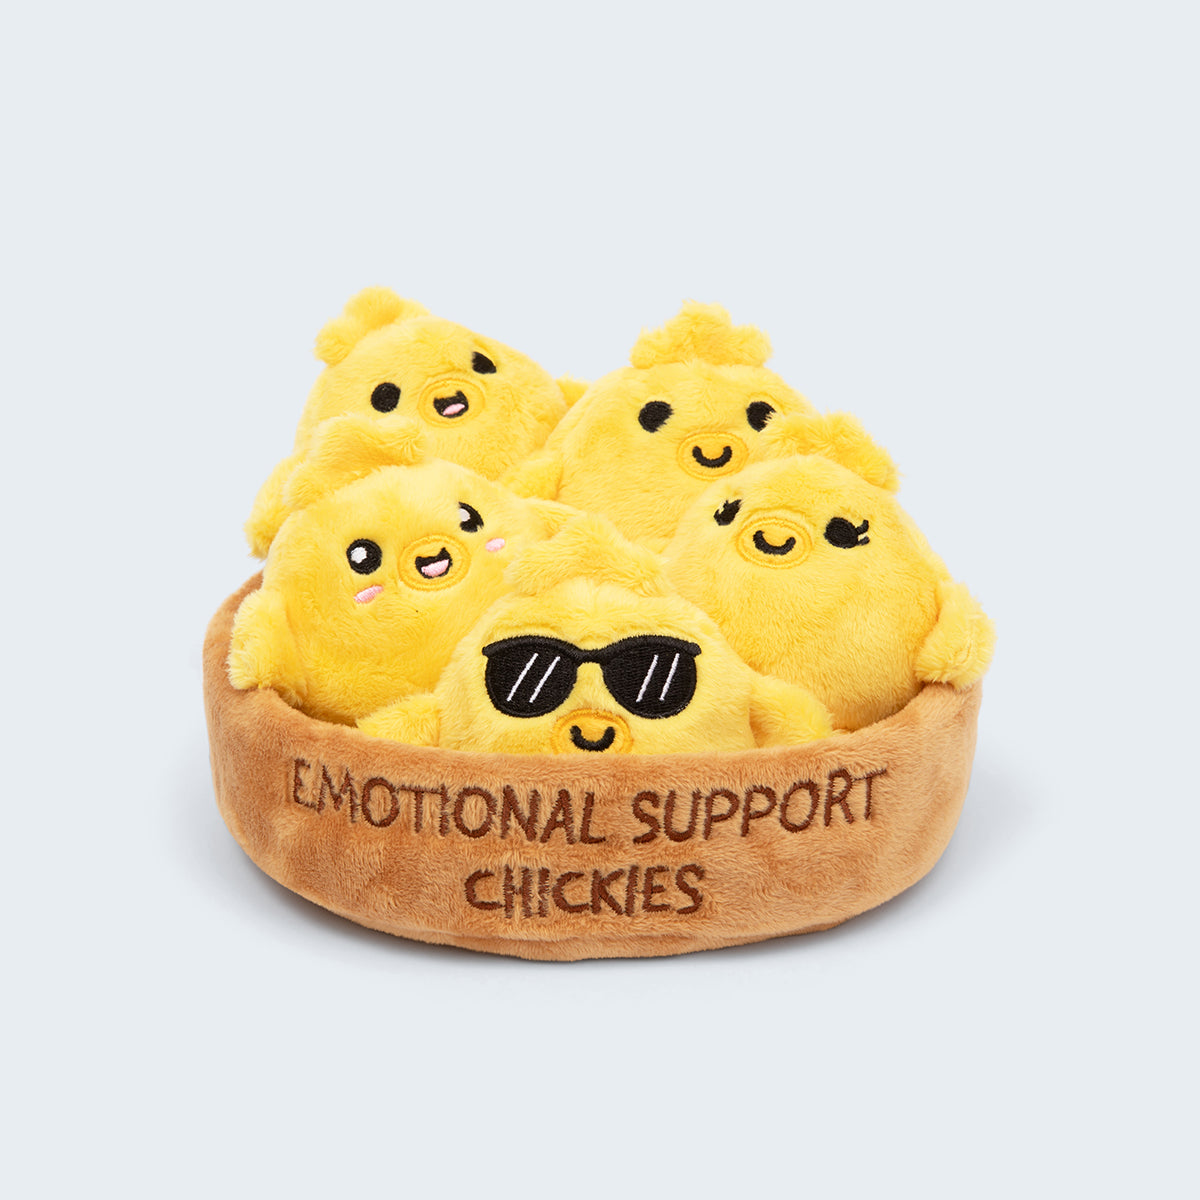 Emotional Support – Relatable